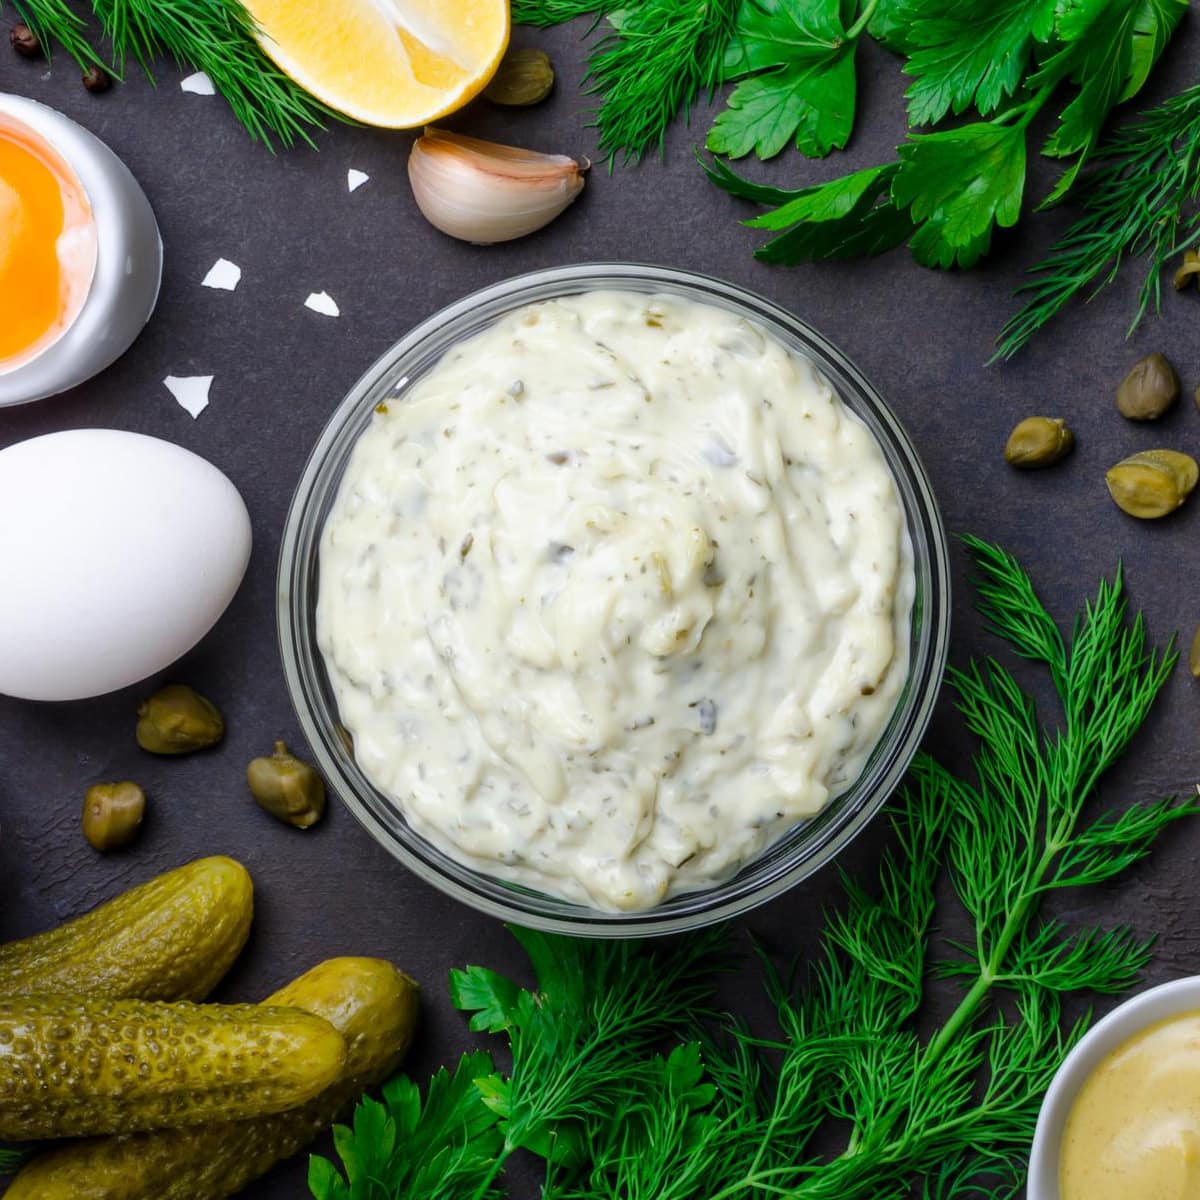 Top view of tartar sauce near dill, cucumbers, garlic, capers and eggs.